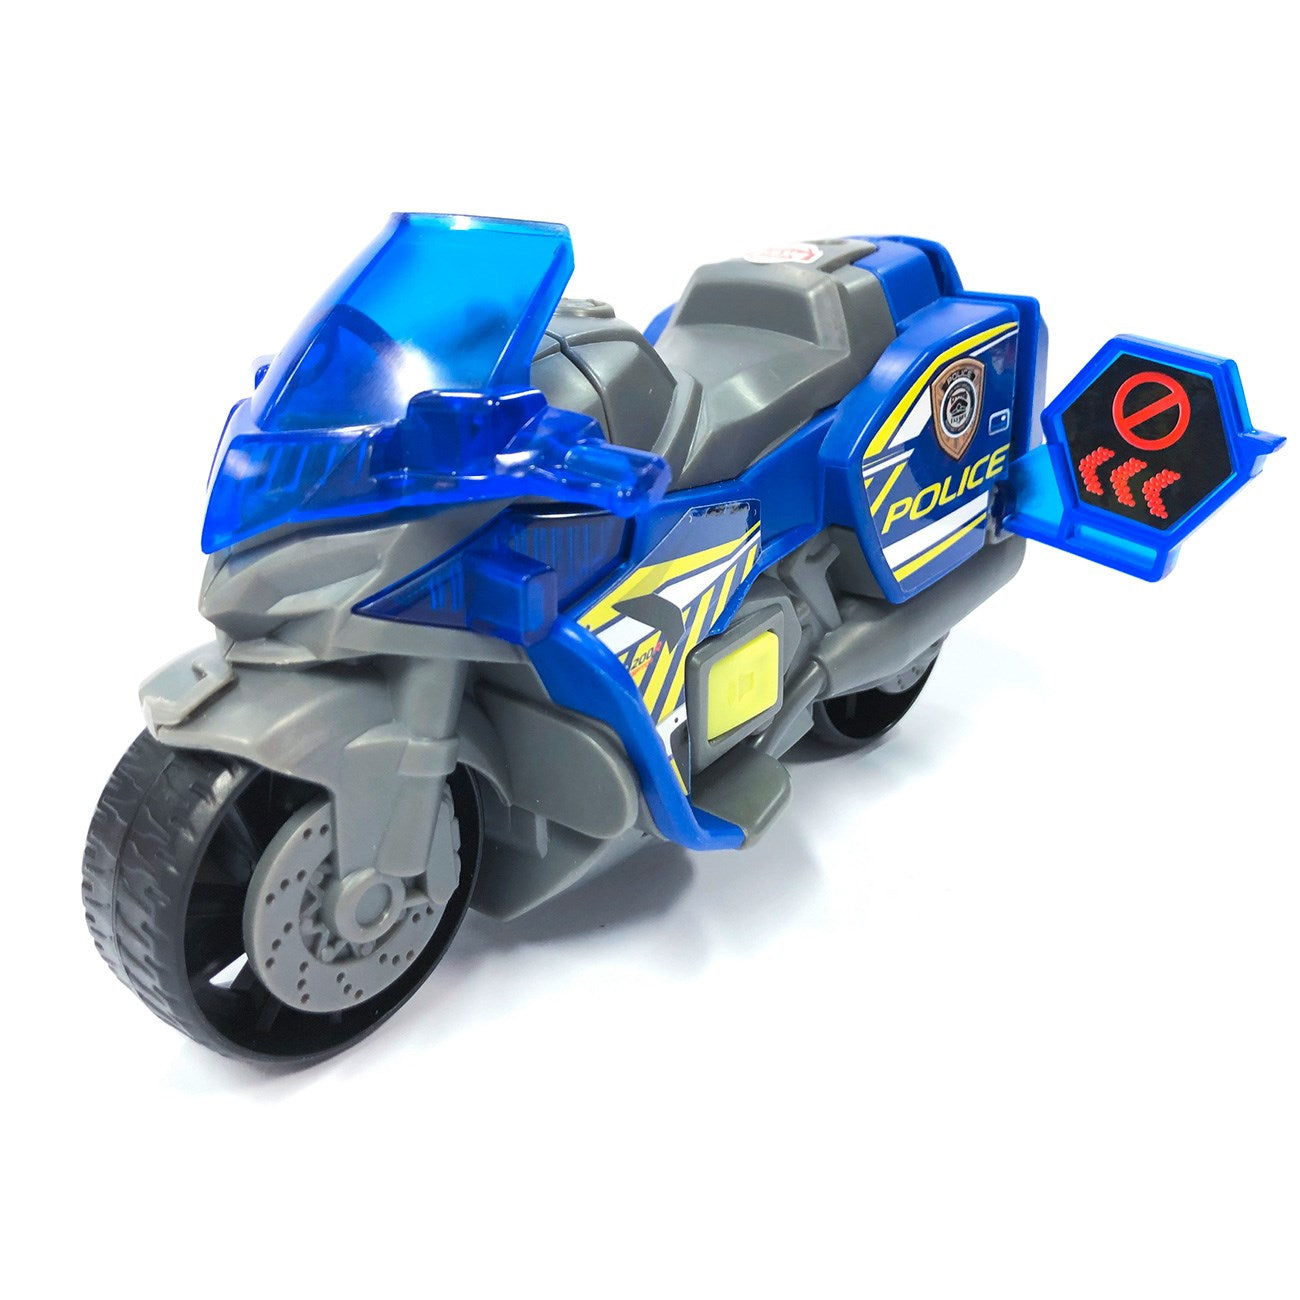 Dickie Toys Police Motorcycle